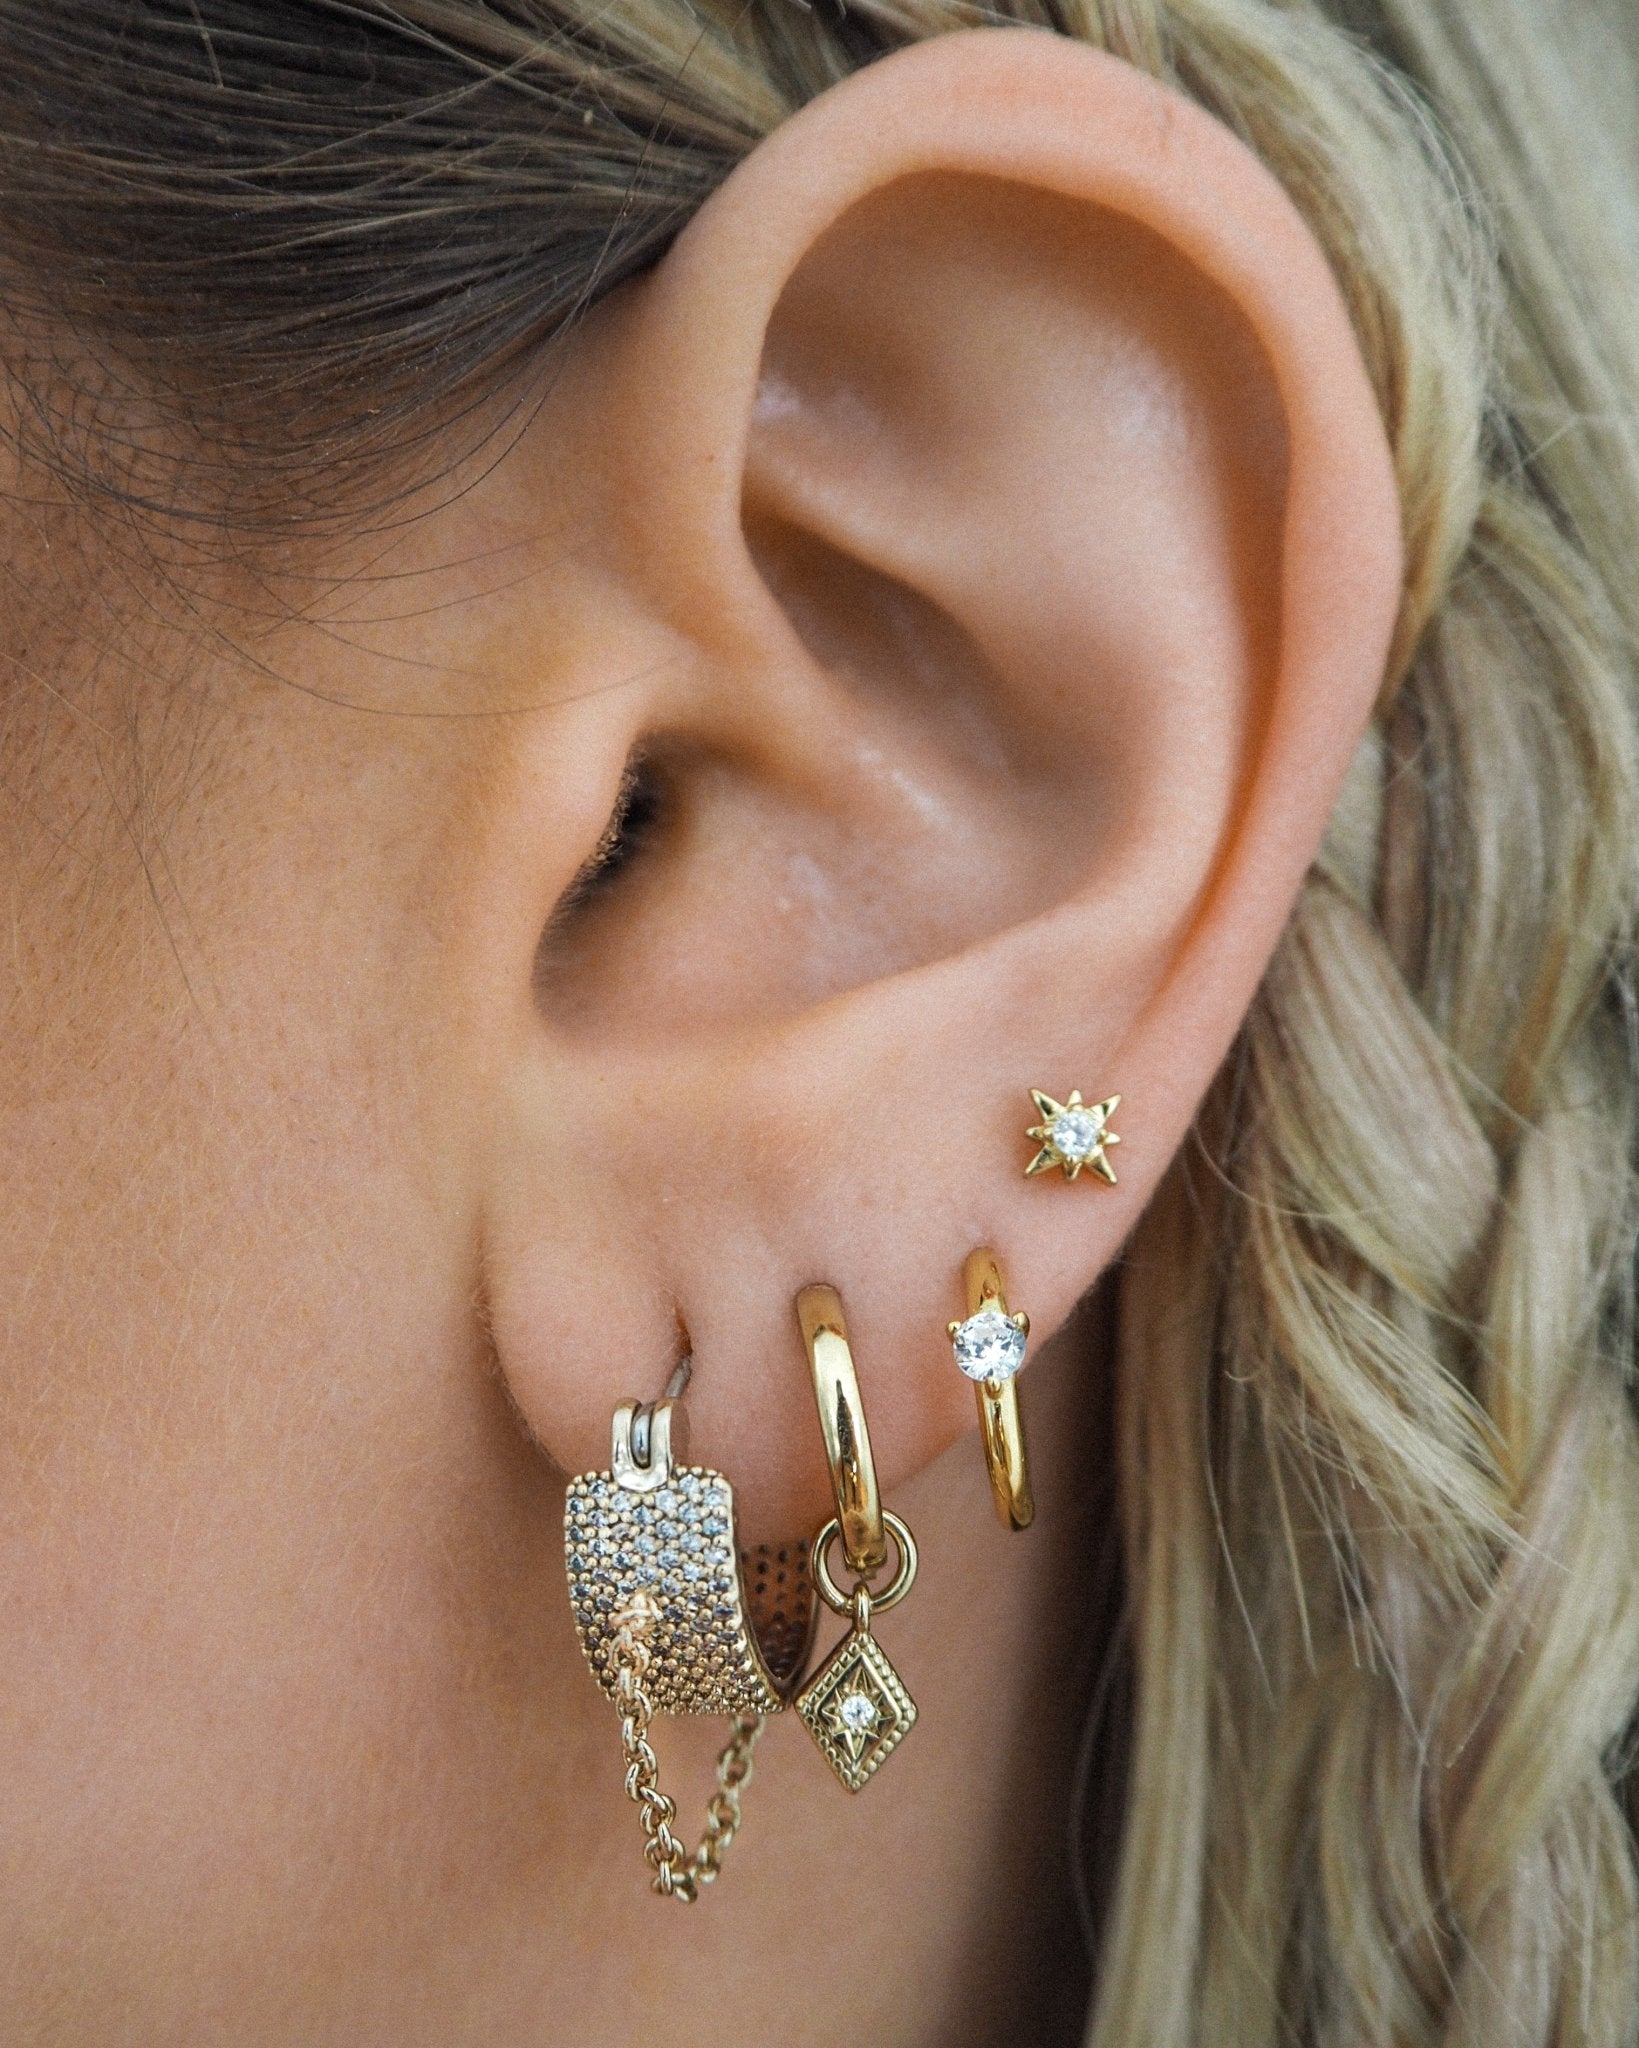 Monroe earrings - five and two jewelry